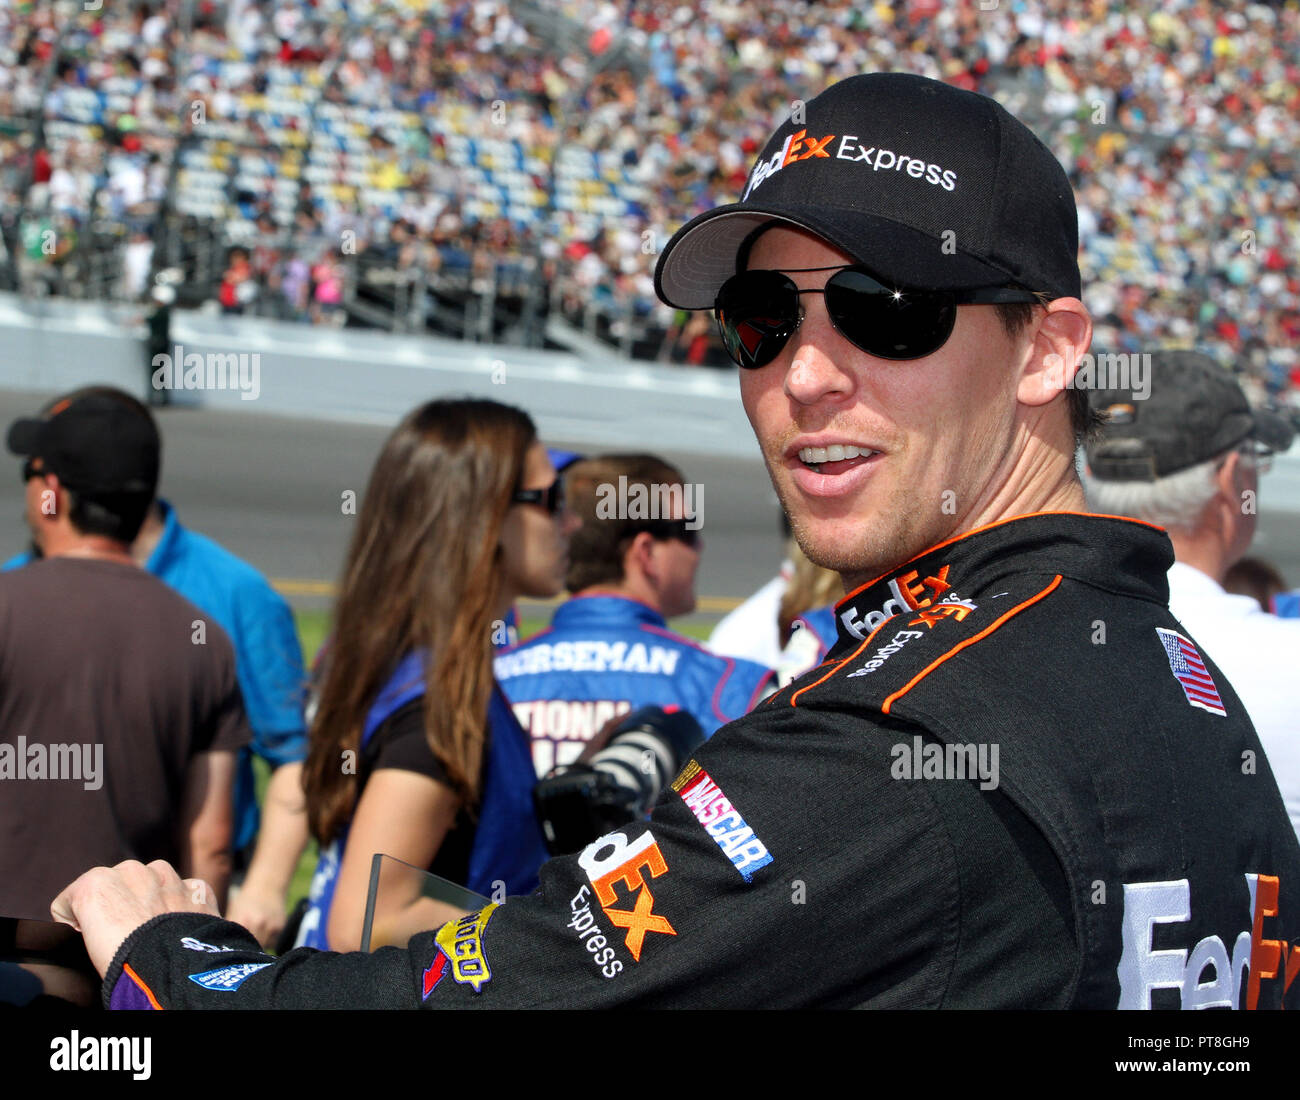 Denny Hamlin waits on pit road for the start of the NASCAR Sprint Cup Budweiser Duel #1, at Daytona International Speedway in Daytona, Florida on February 21, 2013. Stock Photo